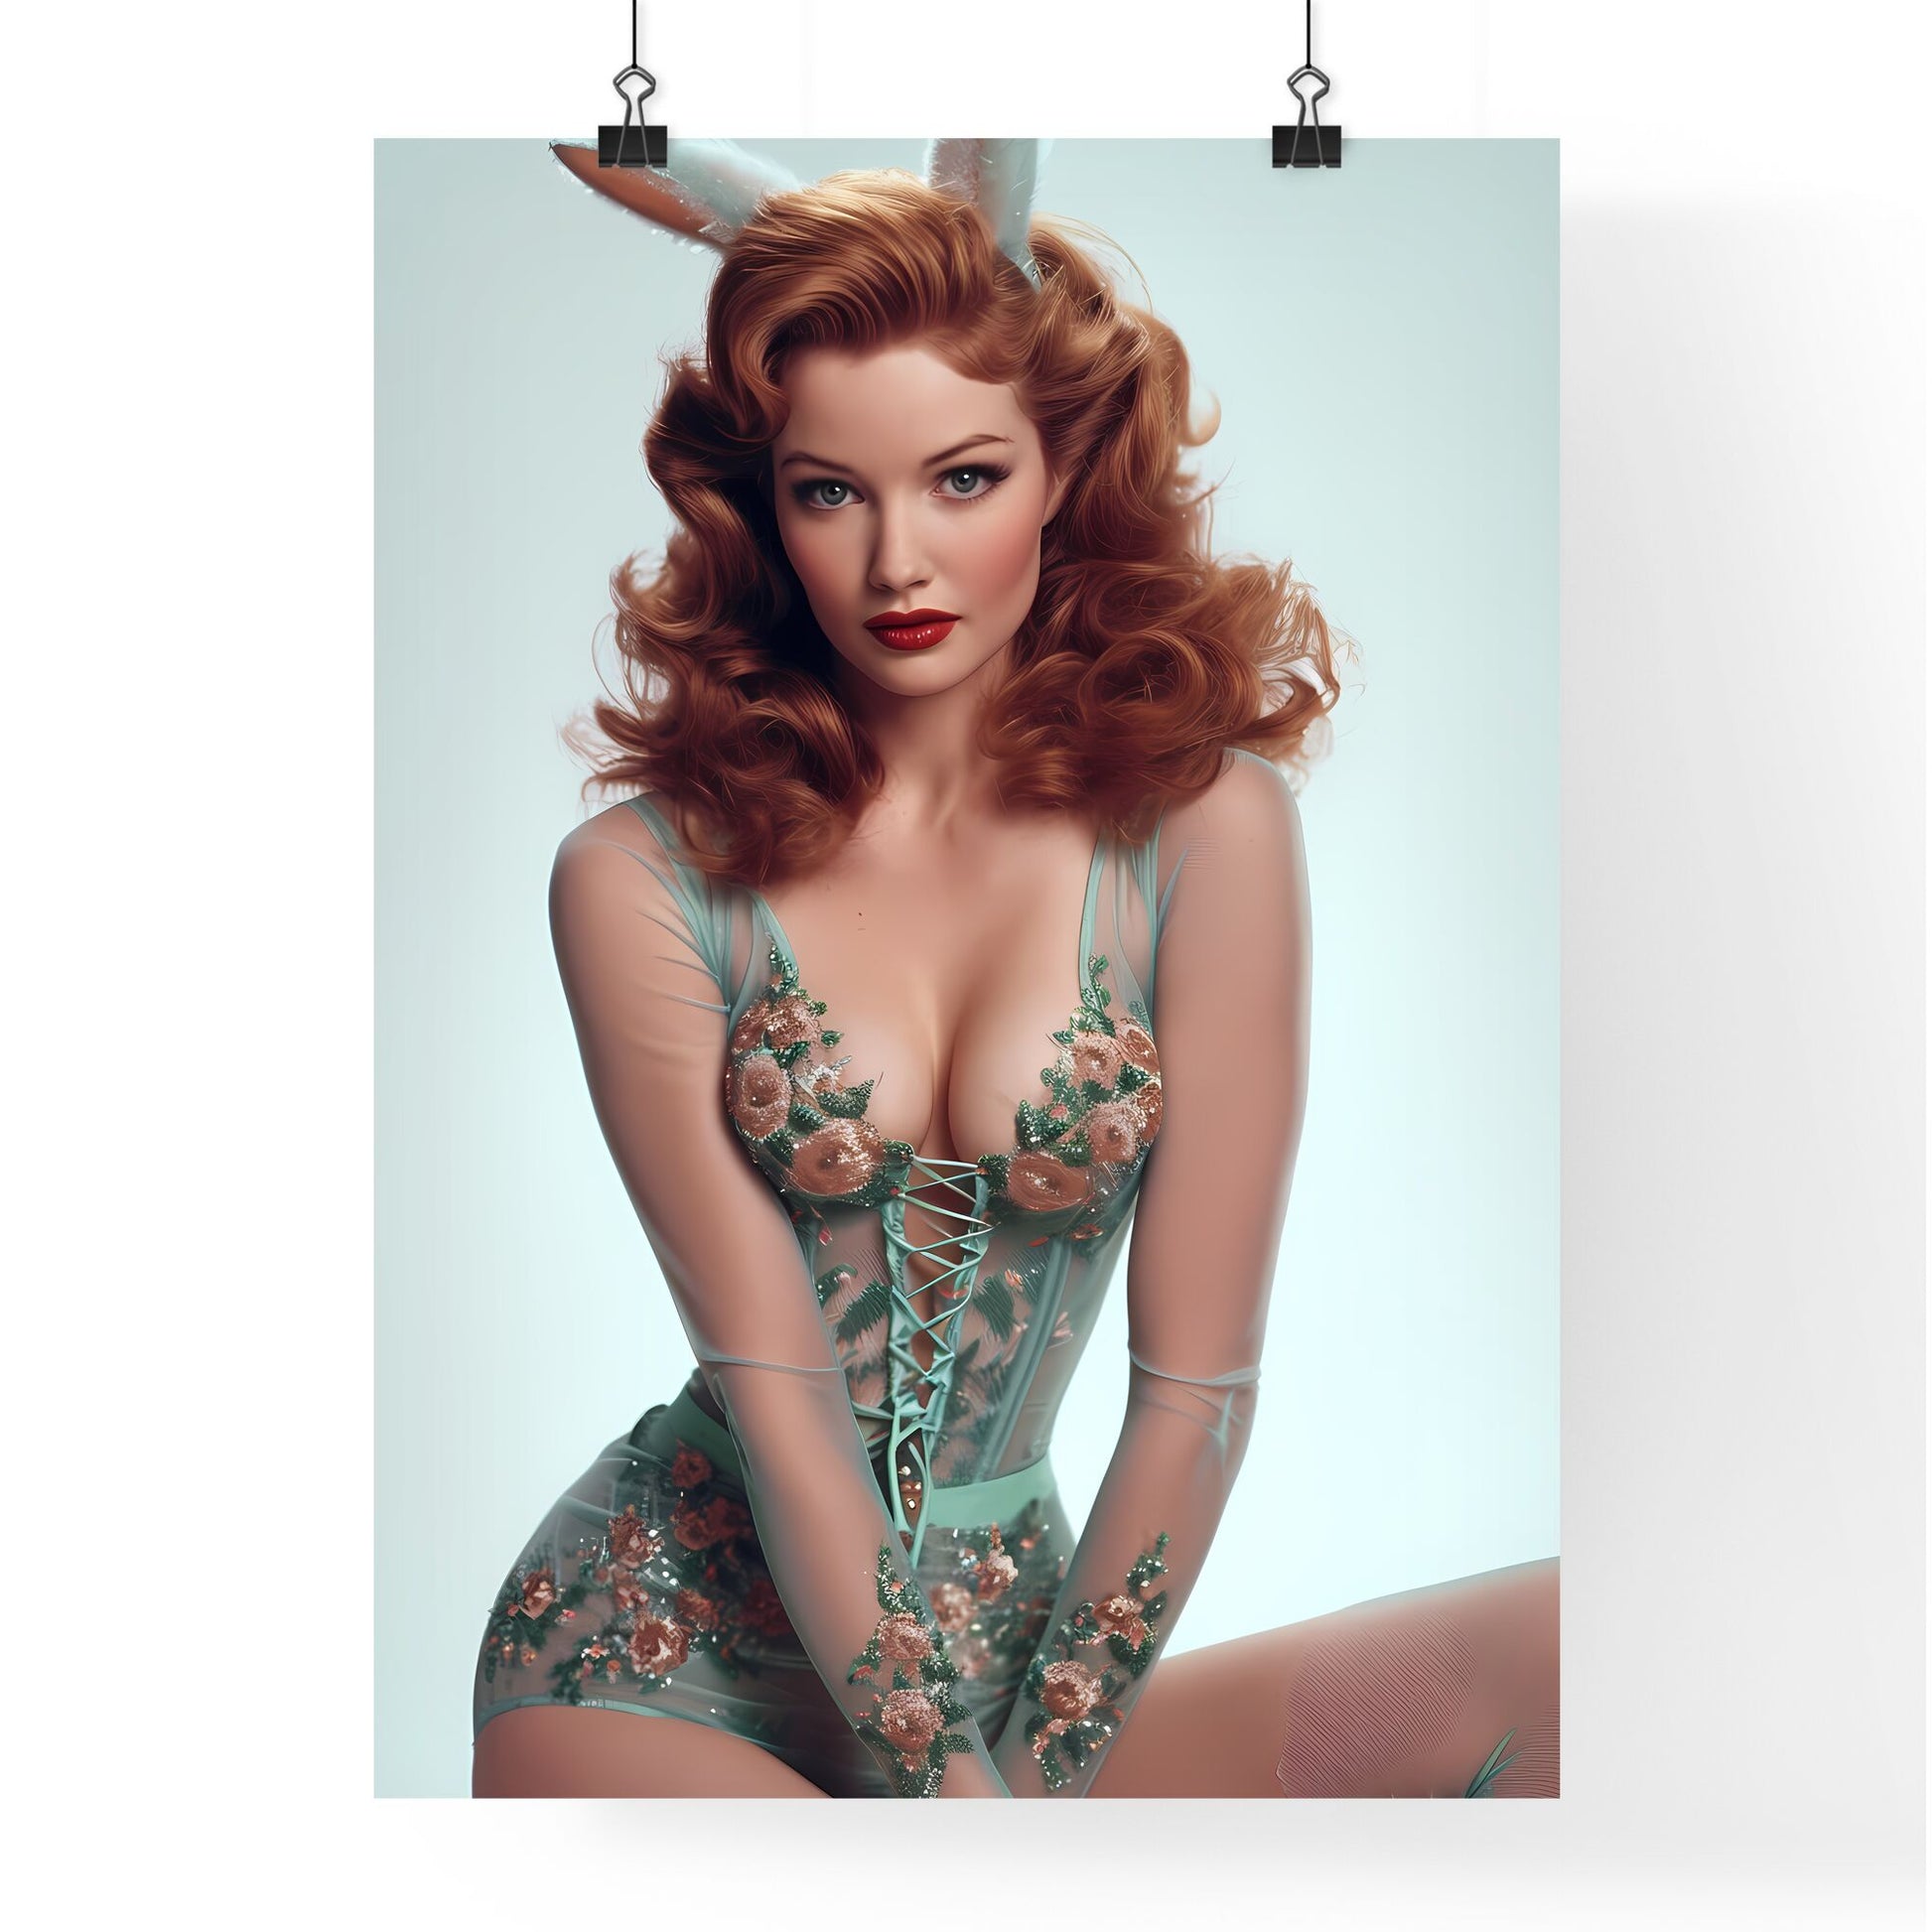 Poster of a pin up with white background - Art print of a woman in a green dress Default Title